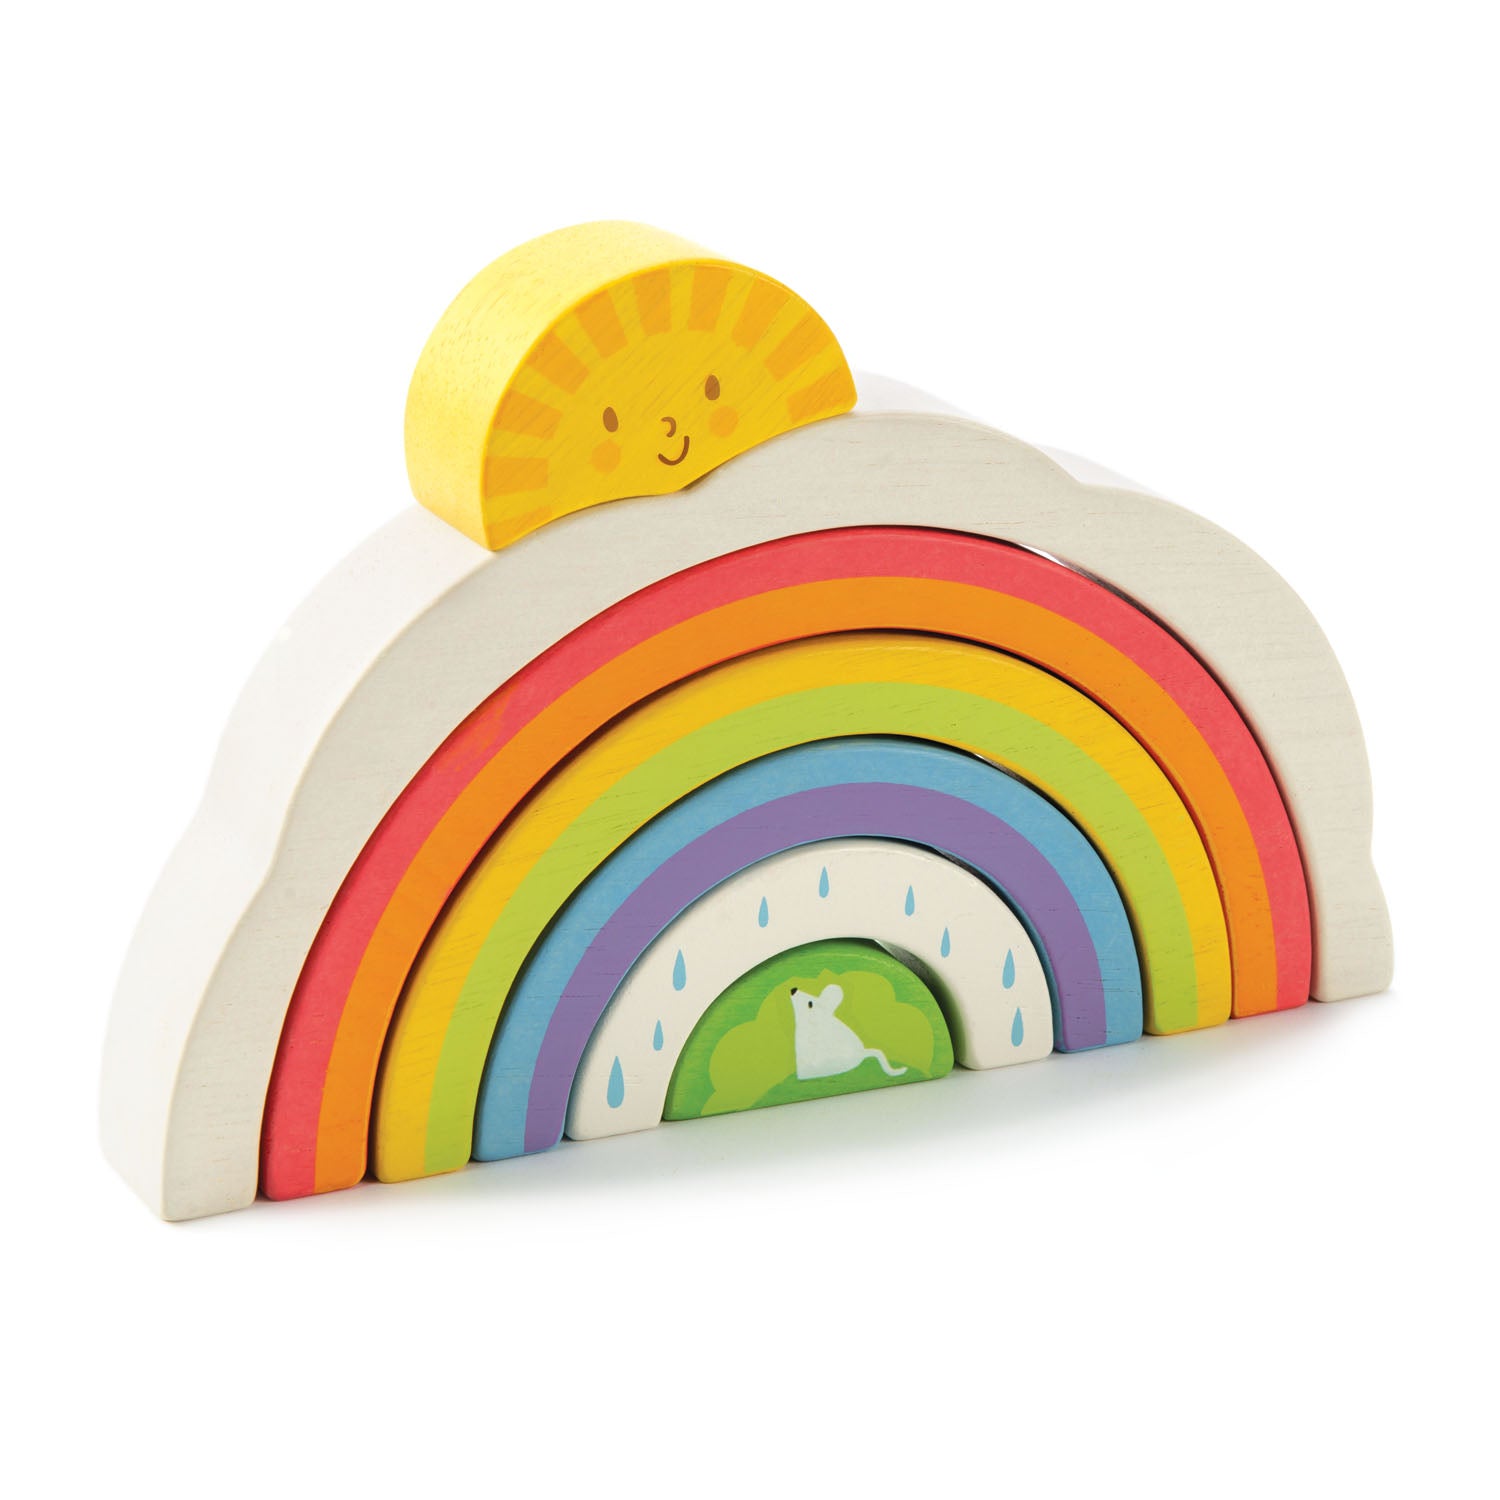 <p>Stack these tunnel pieces together to make a real rainbow! A great first puzzle for your toddler to develop their matching skills, size and color recognition. </p>
<p>Age range: 18 months +  </p>
<p>Product size: 8.27&quot; x 1.18&quot; x 5.24&quot;  </p>
<p>Weight: 0.77 lbs</p>
<p><a href="https://www.dropbox.com/s/3uzak4t6rqg1k72/TL8339%20Rainbow%20Tunnel%20Printable.pdf?dl=0" title="Rainbow Tunnel Printable"><img src="https://cdn.shopify.com/s/files/1/1083/1780/files/TL8339-Rainbow-Tunnel-Printable-dl_480x480.jpg?v=1597917136" alt="Rainbow Tunnel Printable"></a></p>
